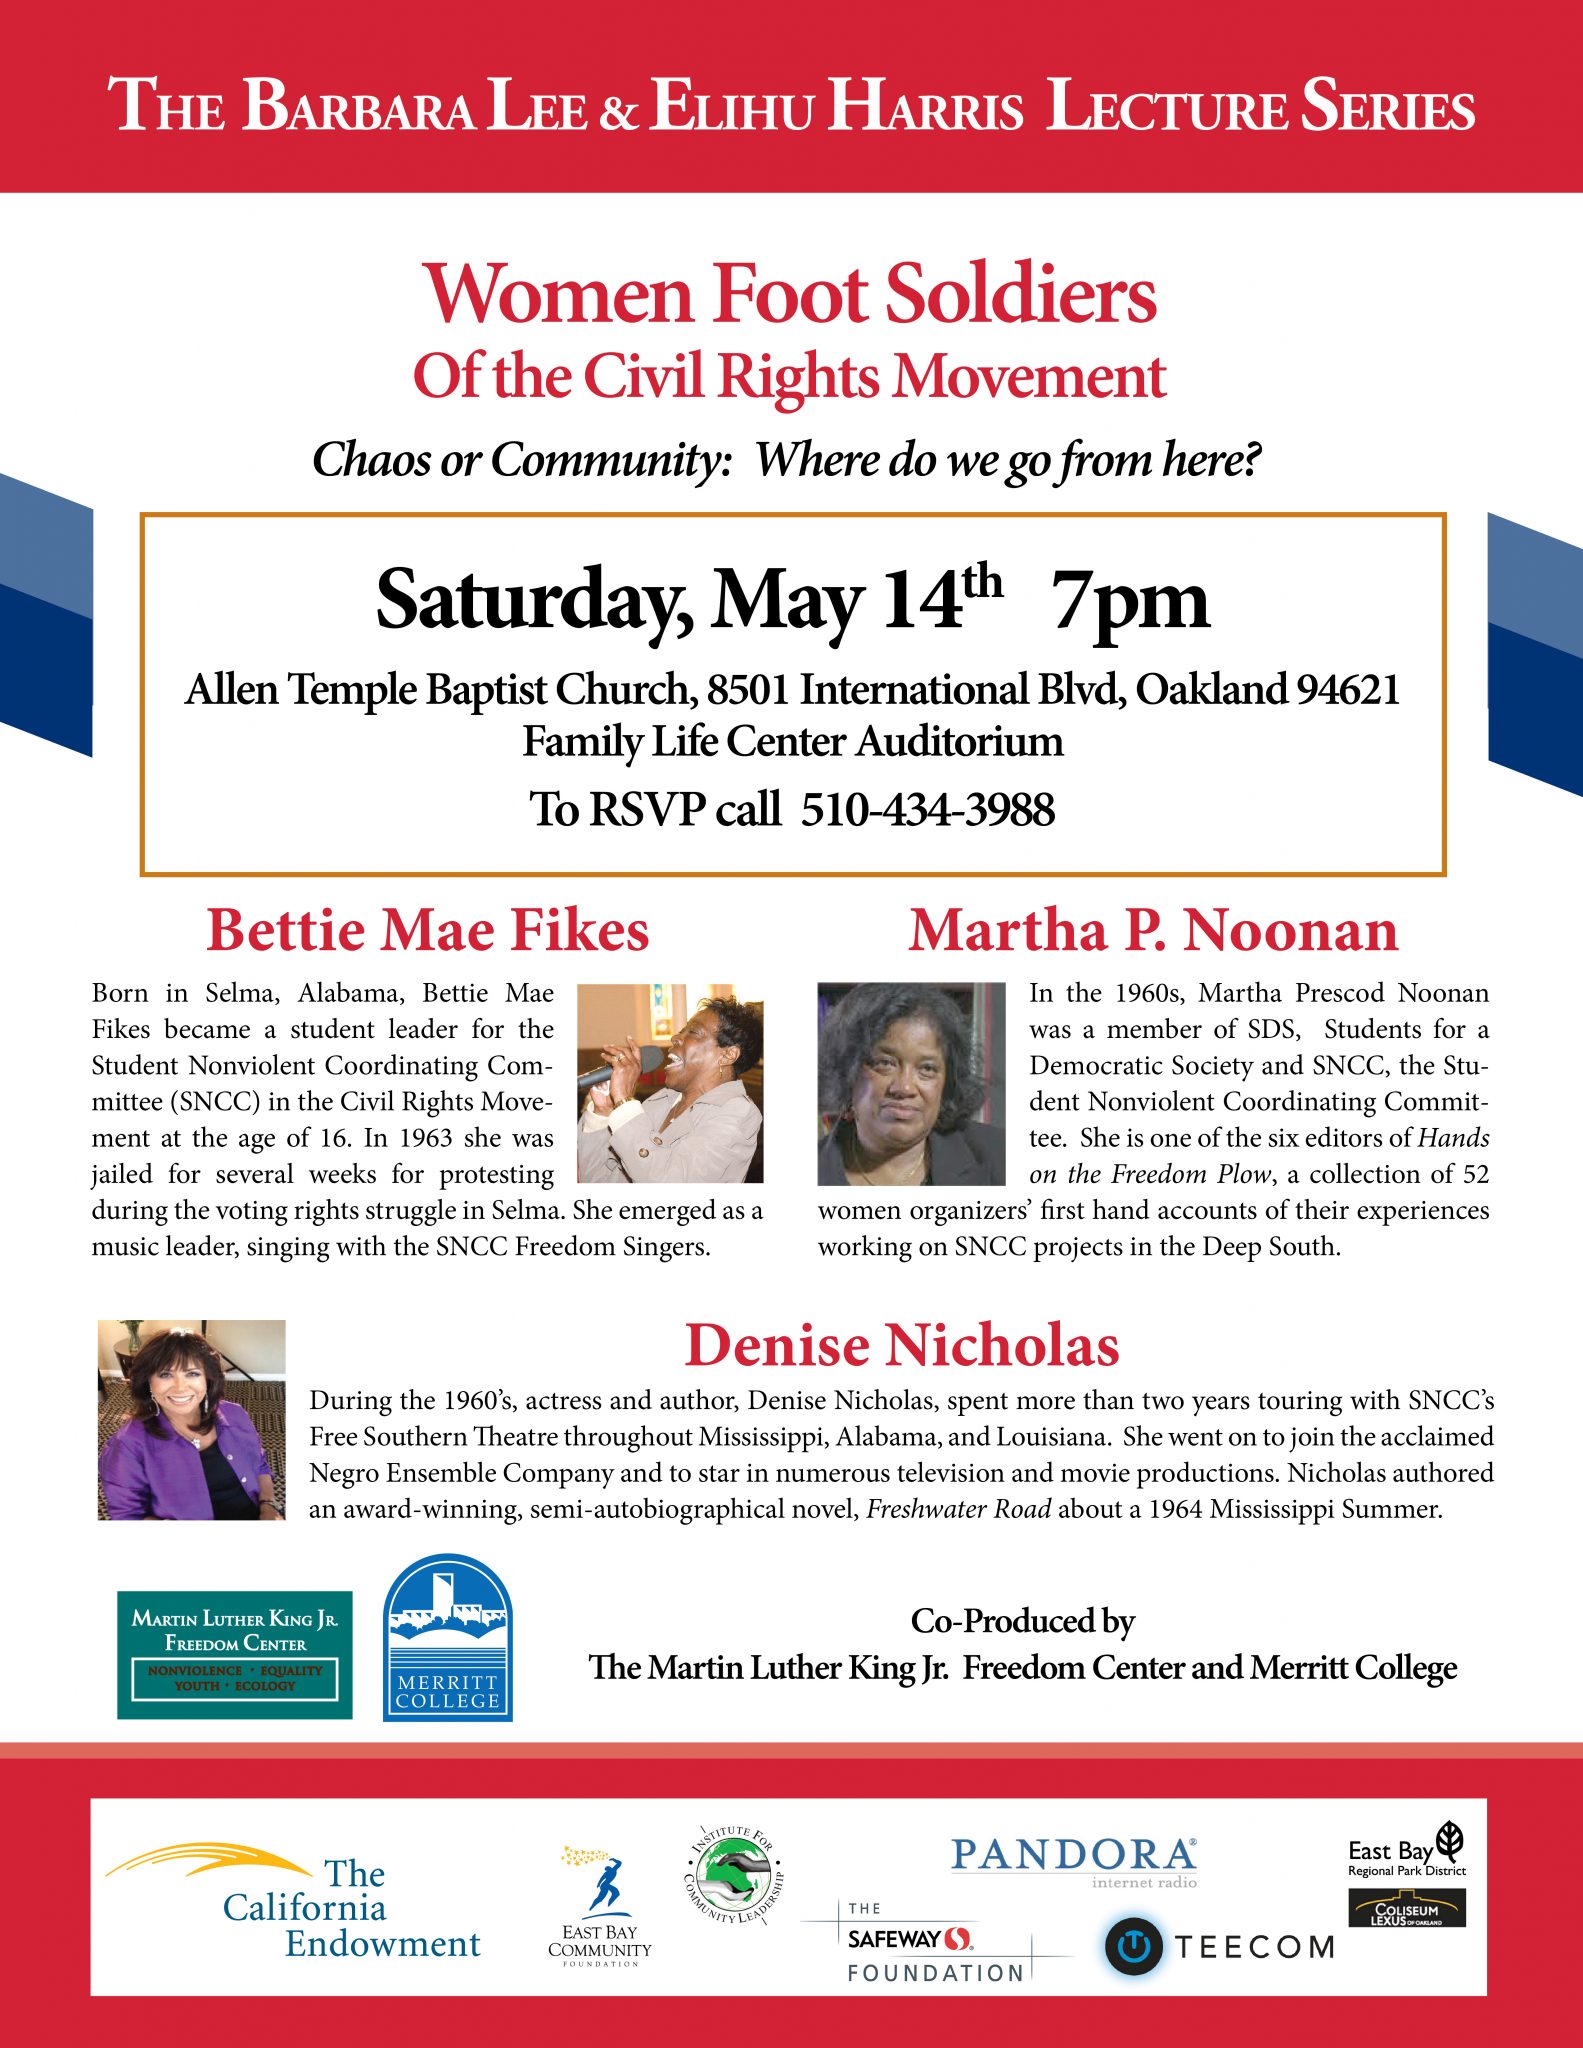 Women Foot Soldiers of the Civil Rights Movement